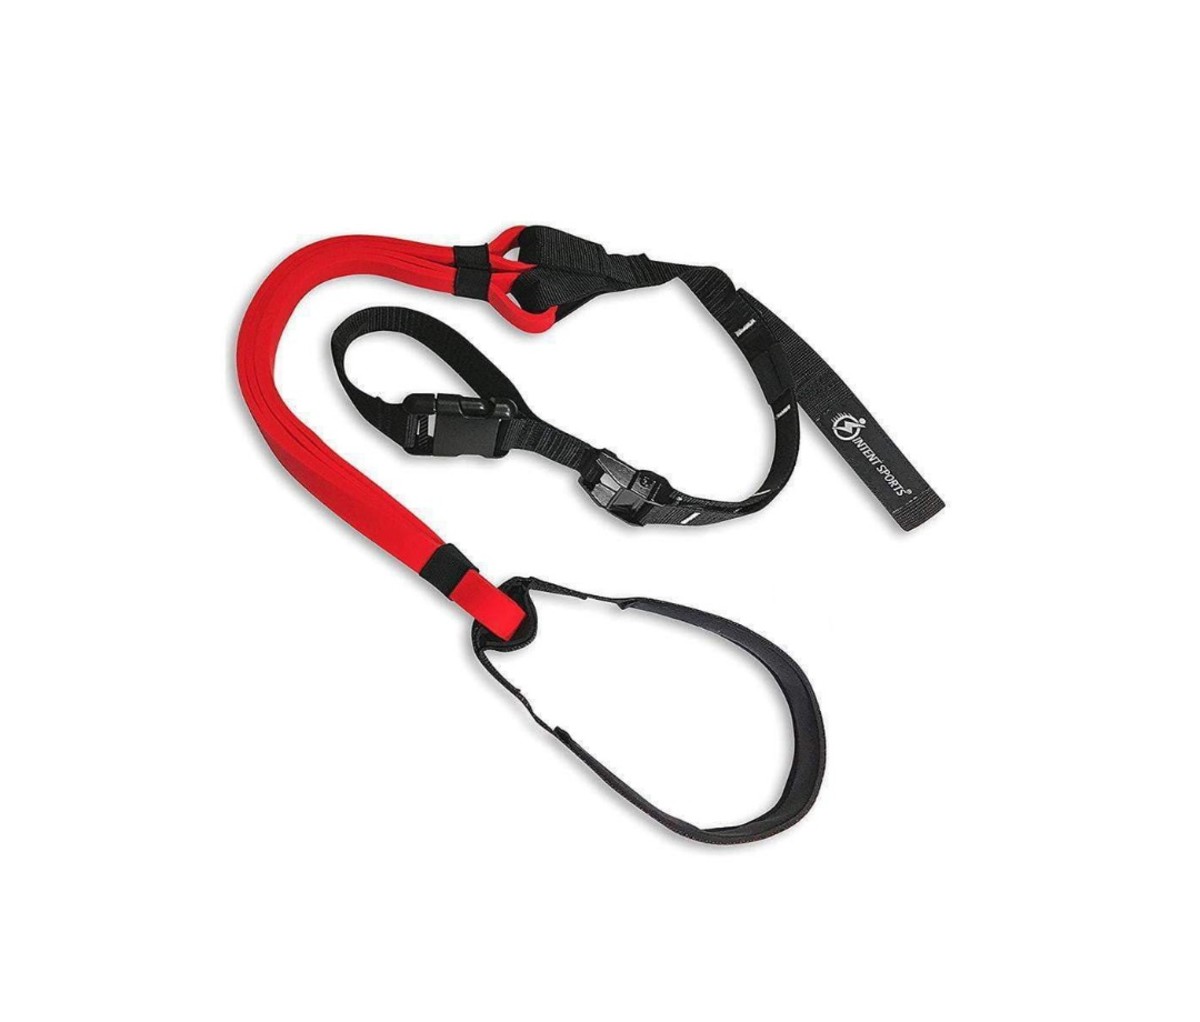 Intent Sports Pullup Assist Band System